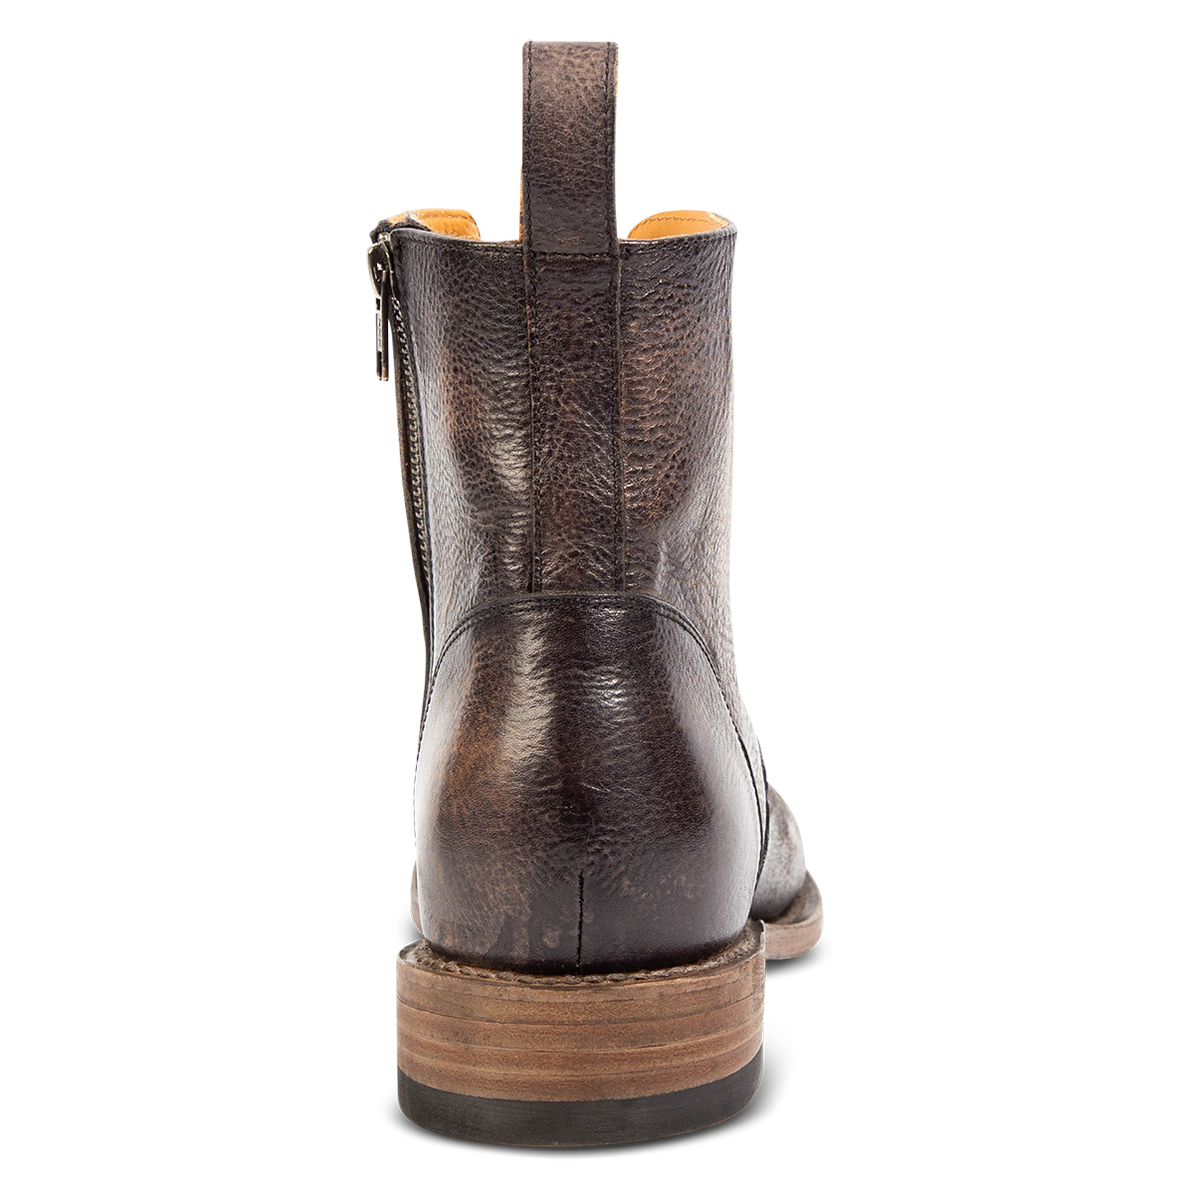 Back view showing leather pull strap and low block heel on FREEBIRD men's Porter black leather boot 